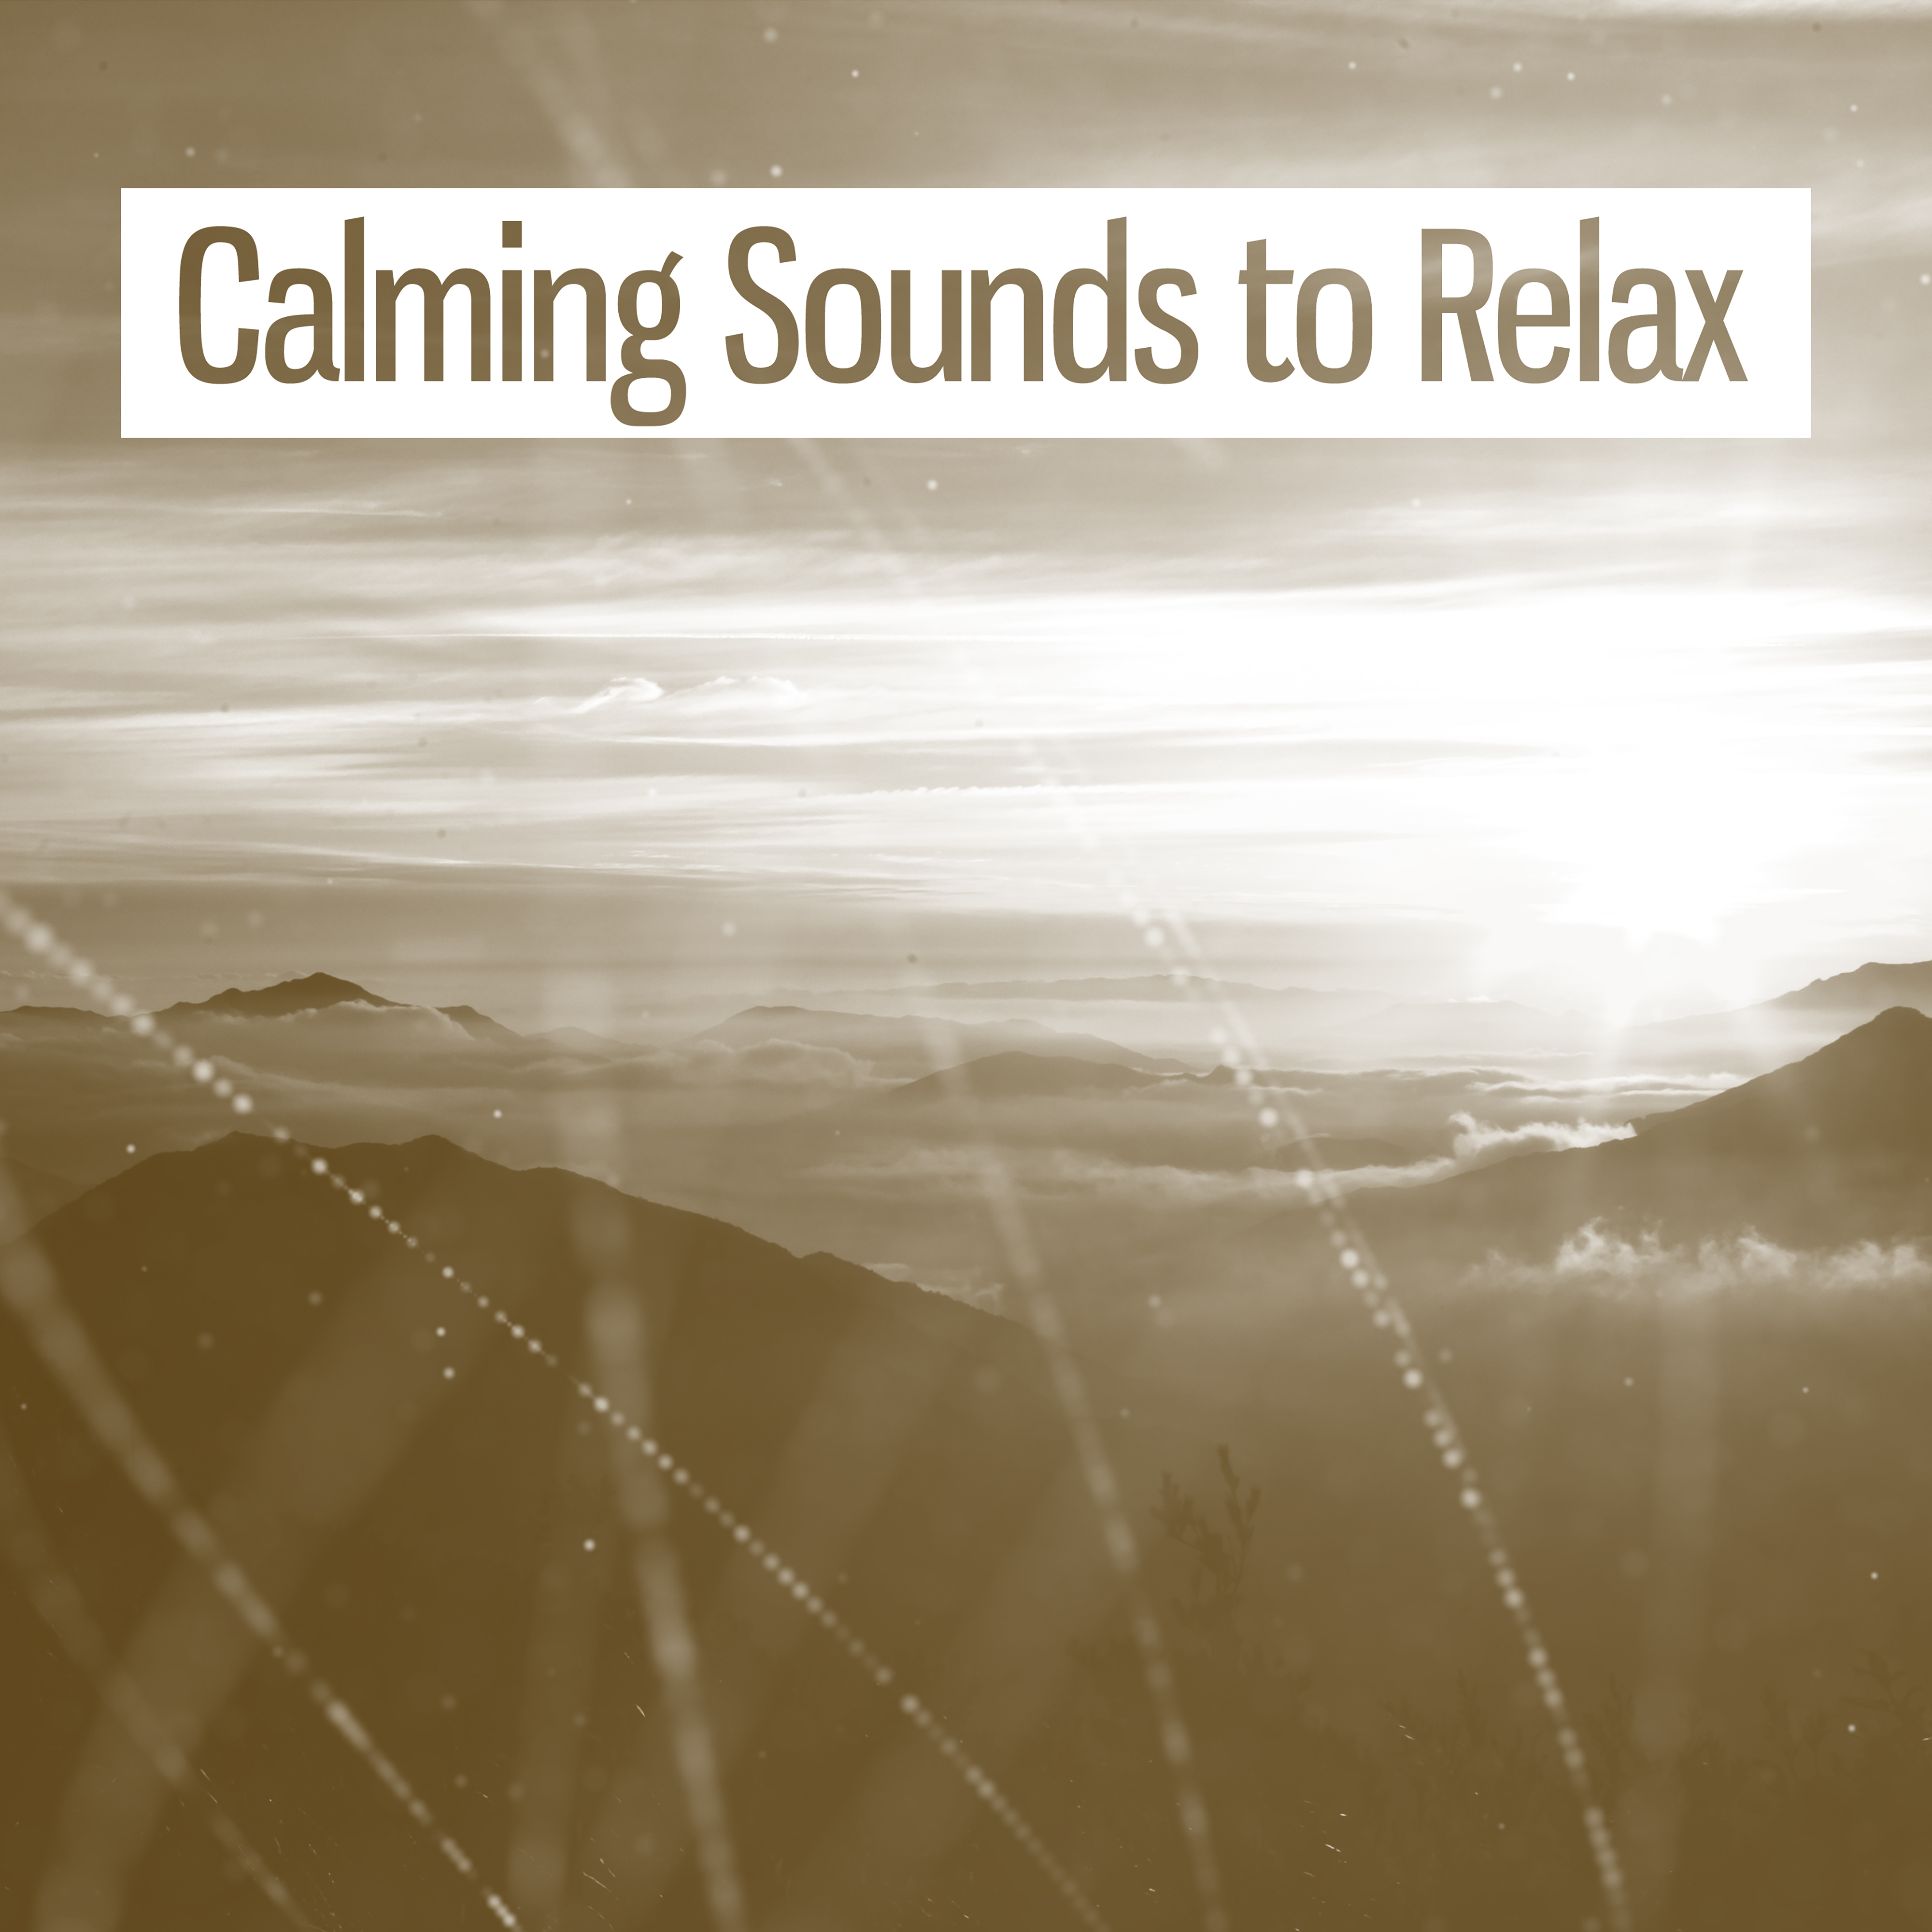 Calming Sounds to Relax – Rest with New Age Music, Soft Sounds, Easy Listening